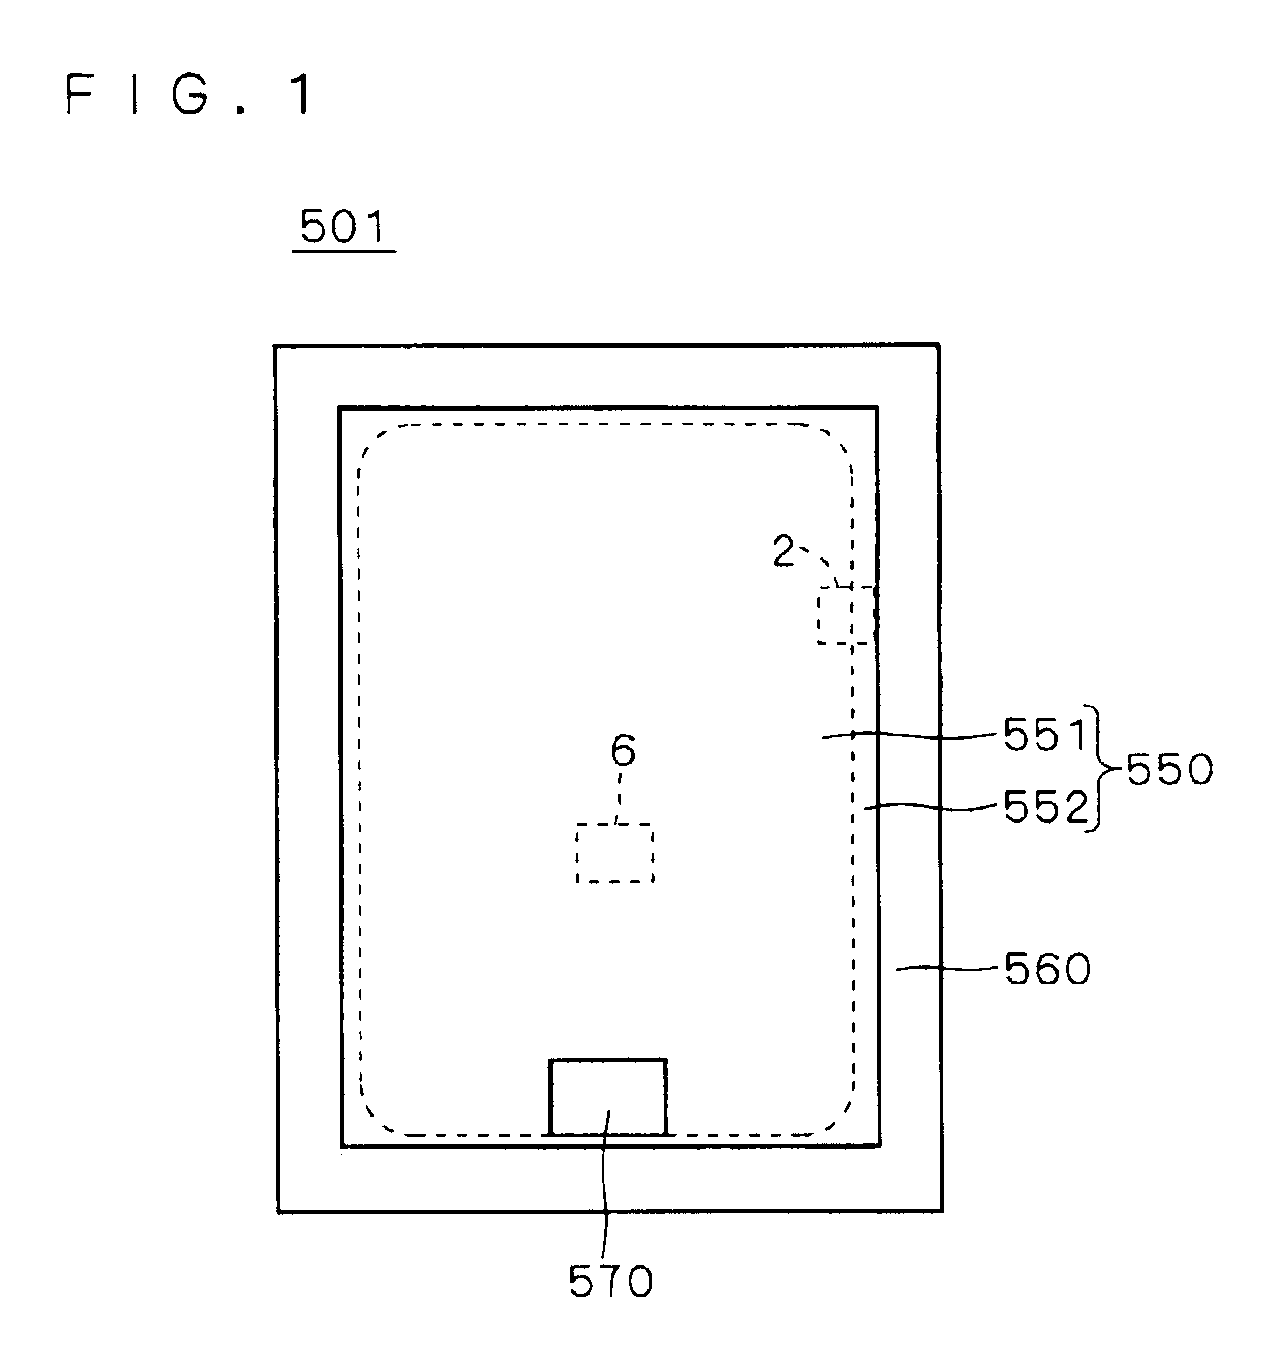 Power semiconductor device having semiconductor-layer-forming position controlled by ion implantation without using photoresist pattern, and method of manufacturing such power semiconductor device